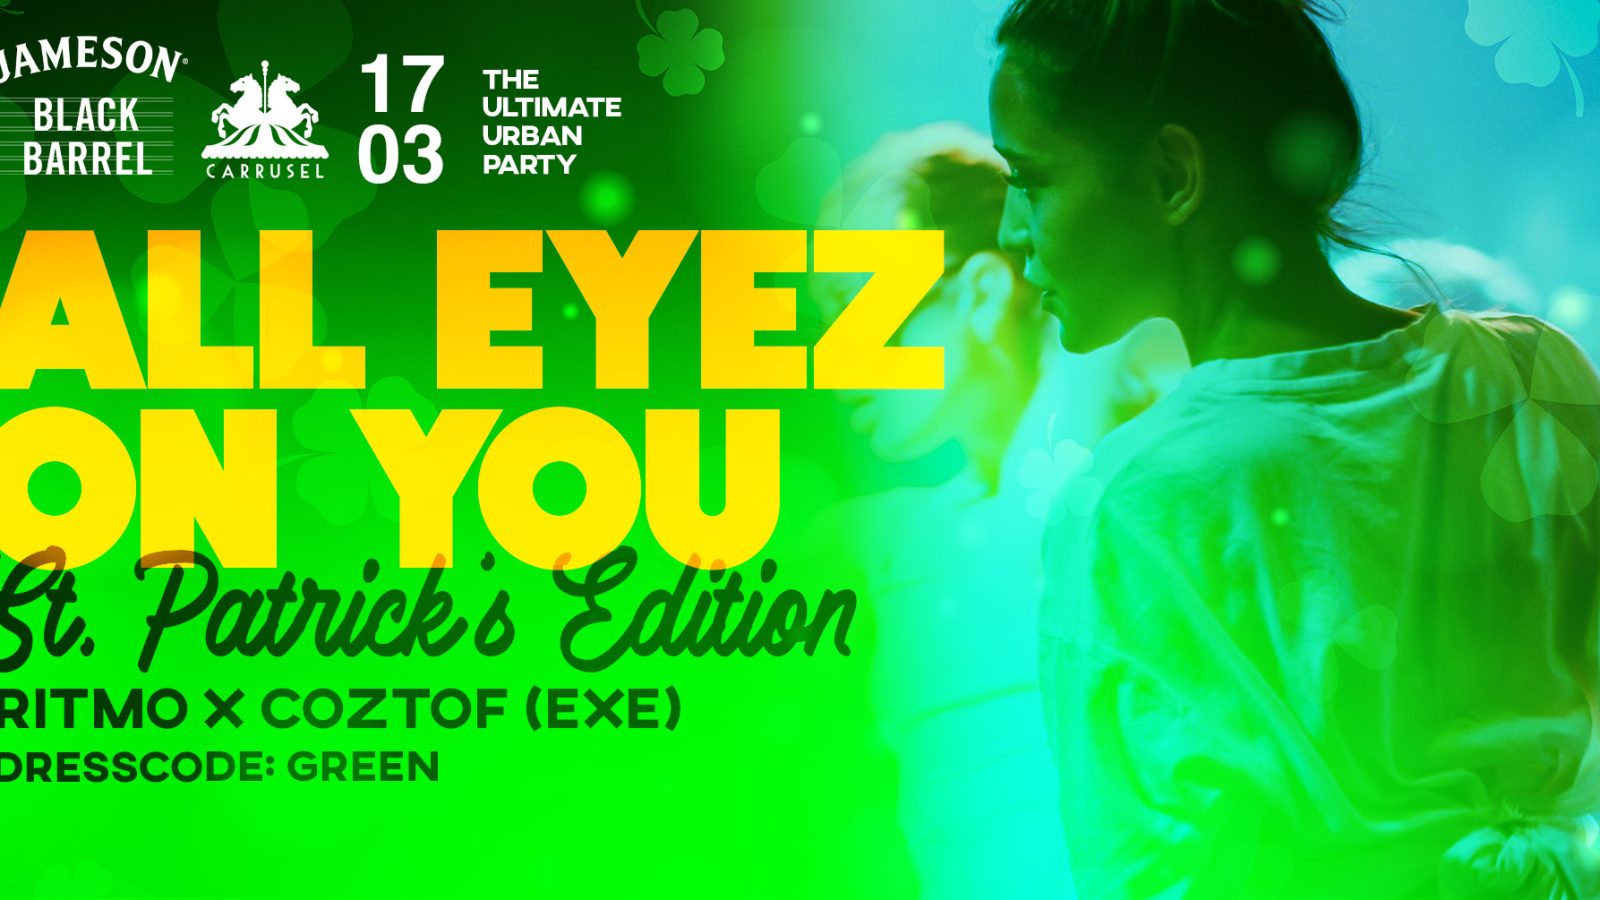 All Eyez On YOU: St. Patrick’s Edition!